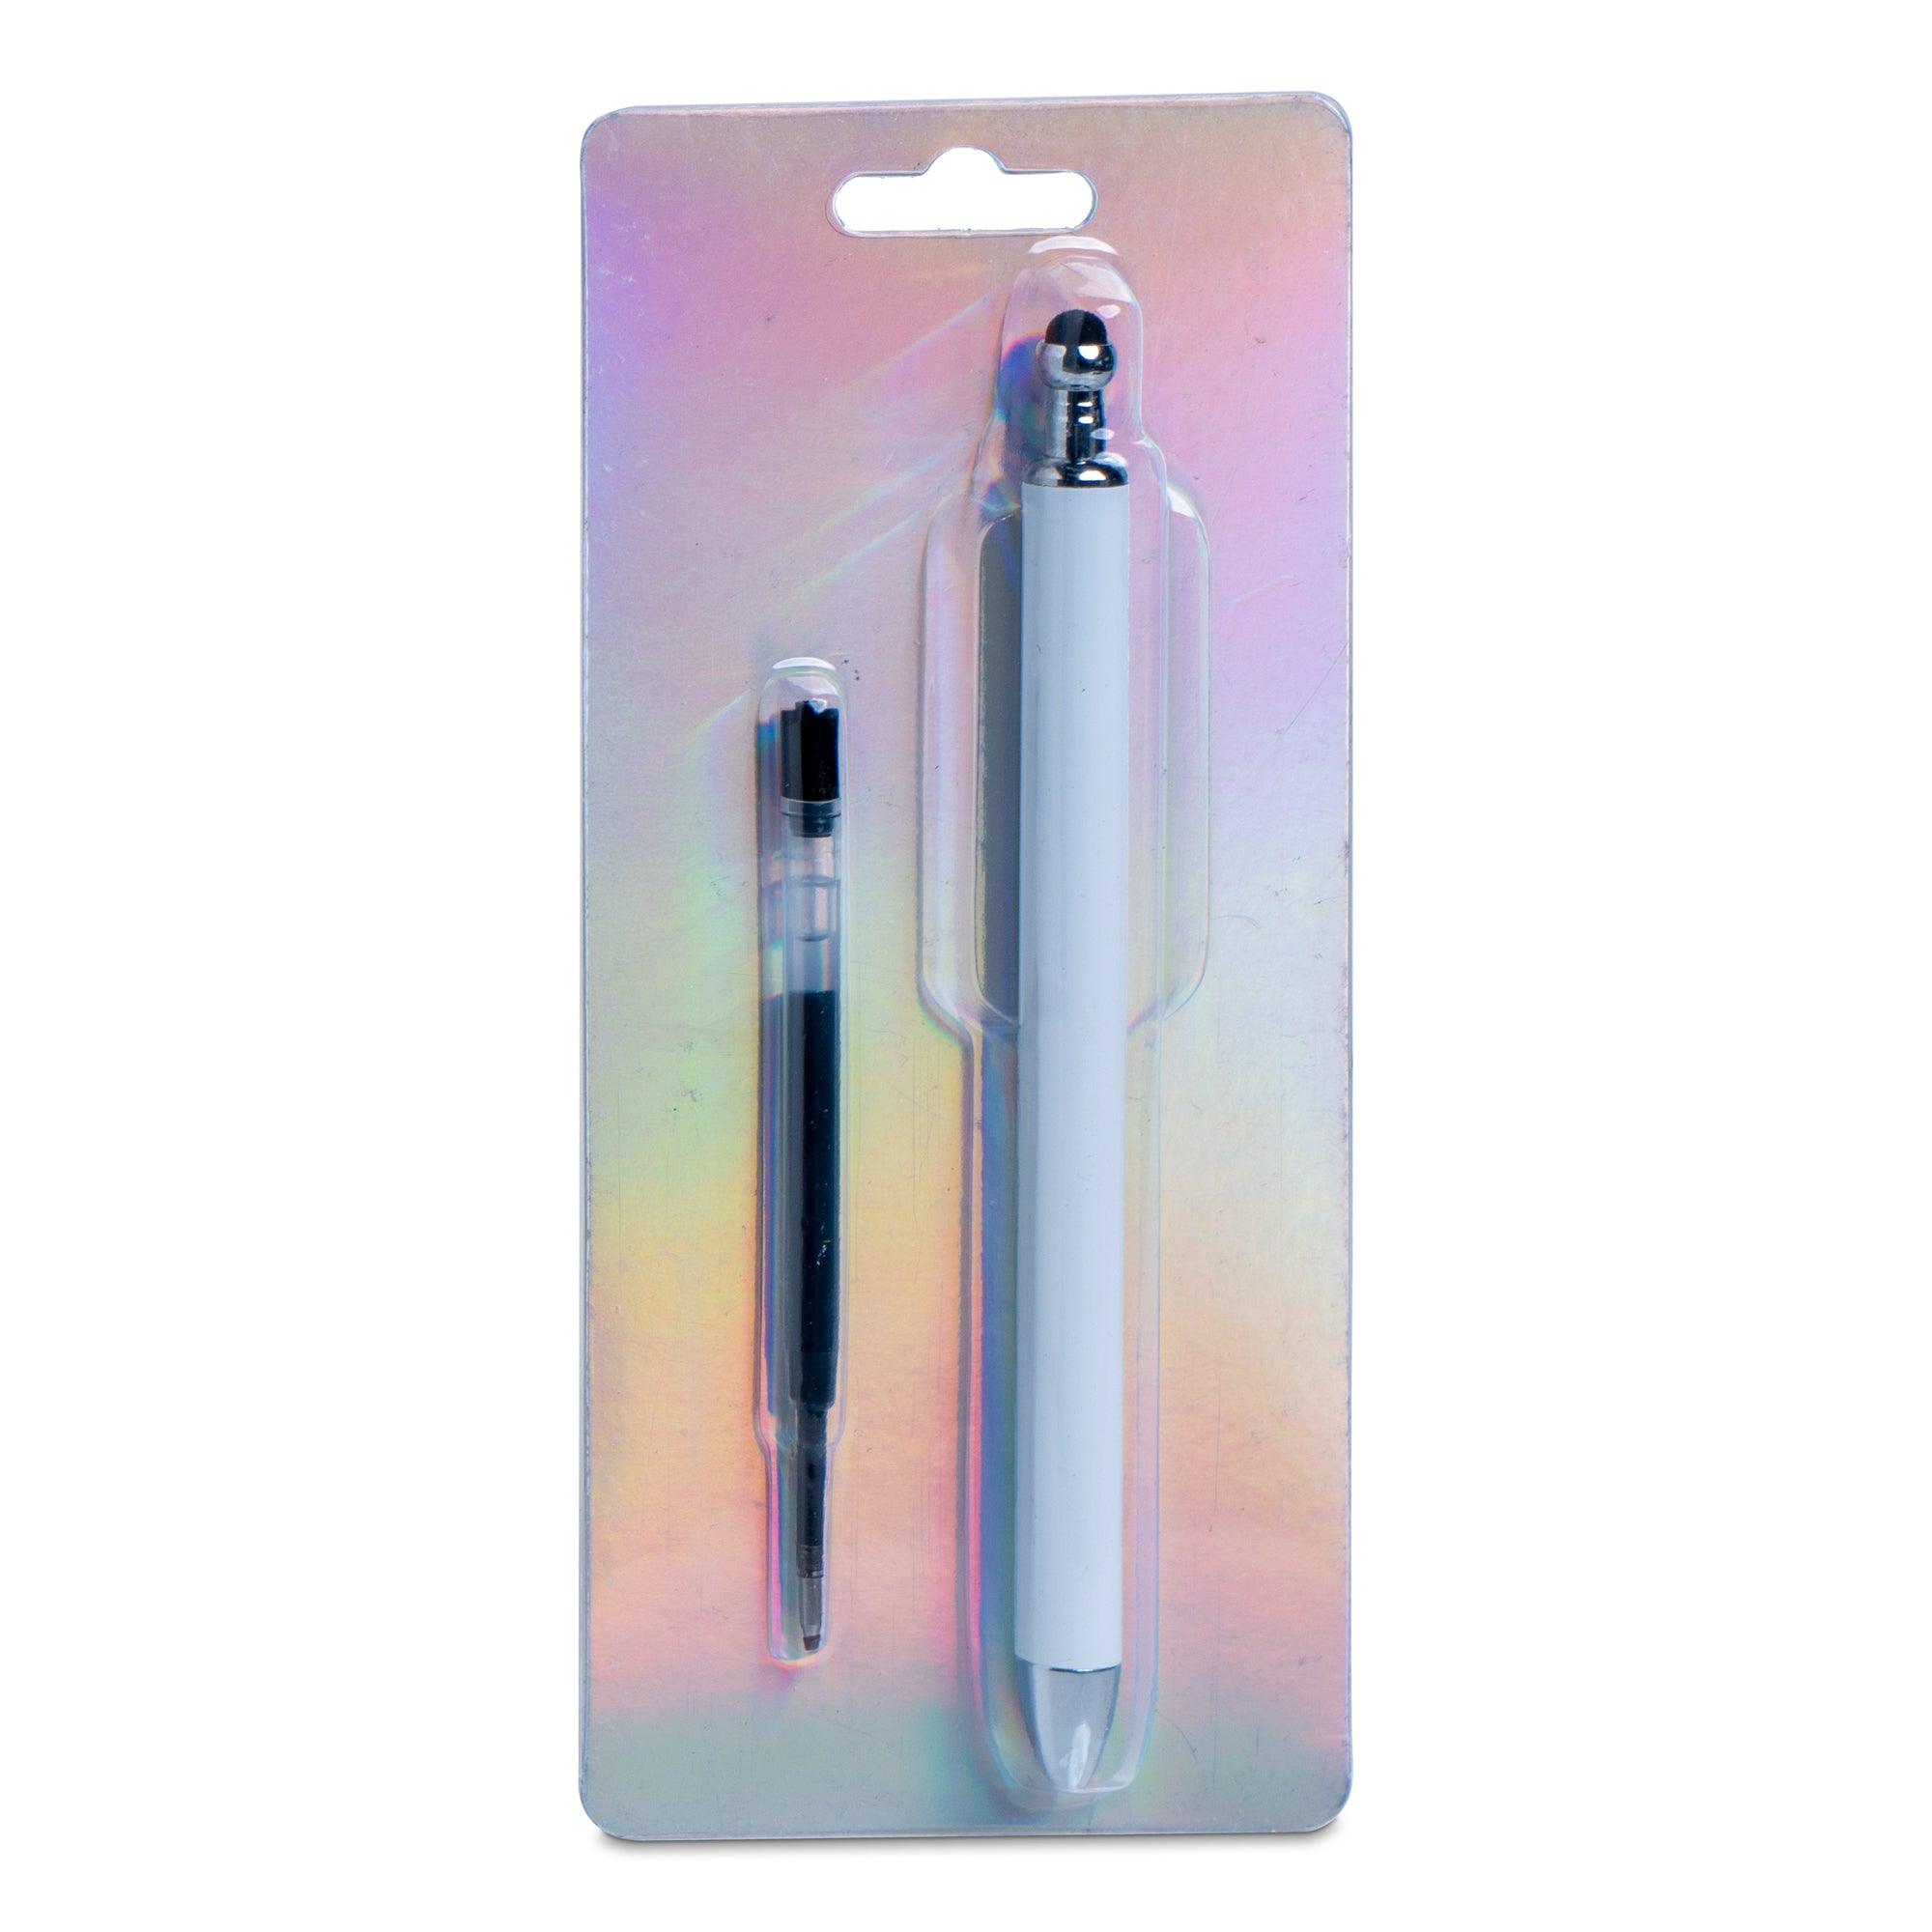 12ct - The Crafters Gel Pen/Pack of 12 Pens